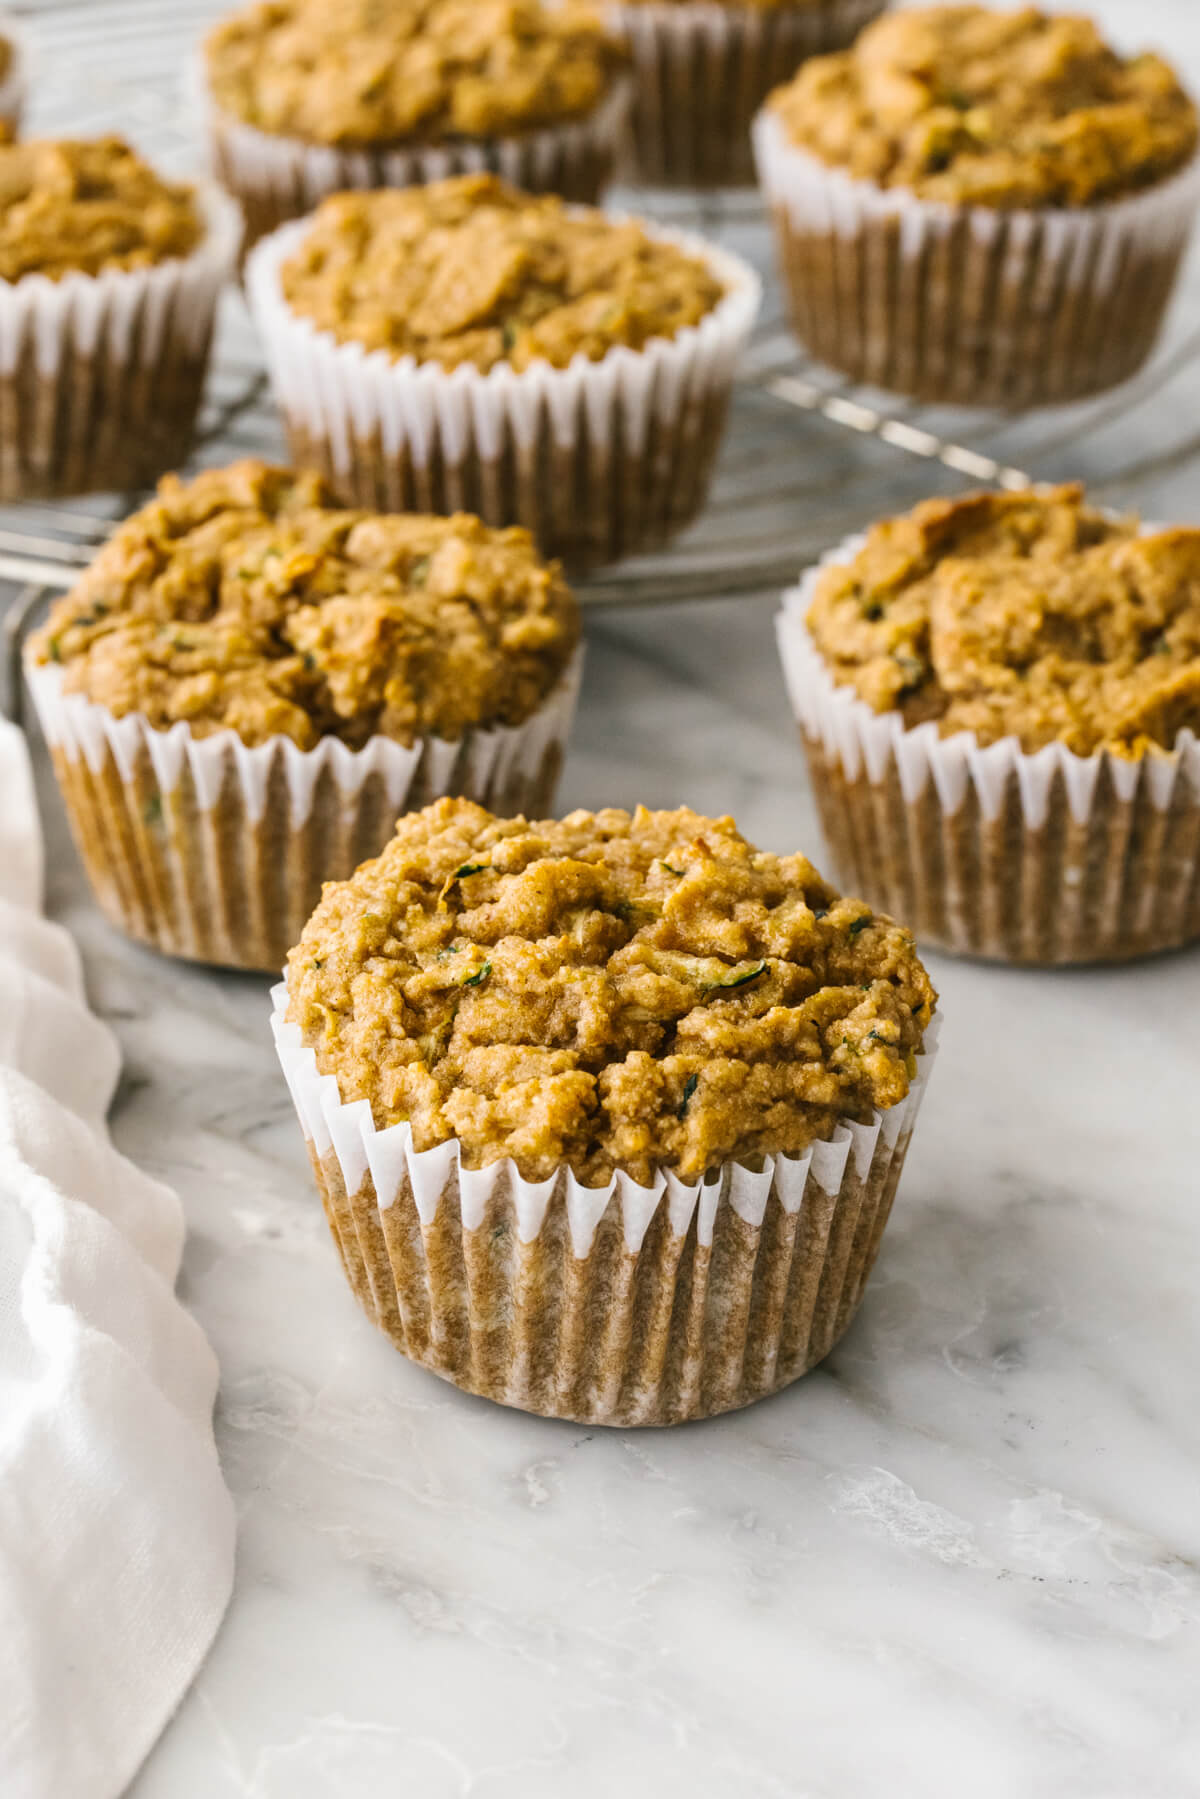 Zucchini muffins spread out on a table